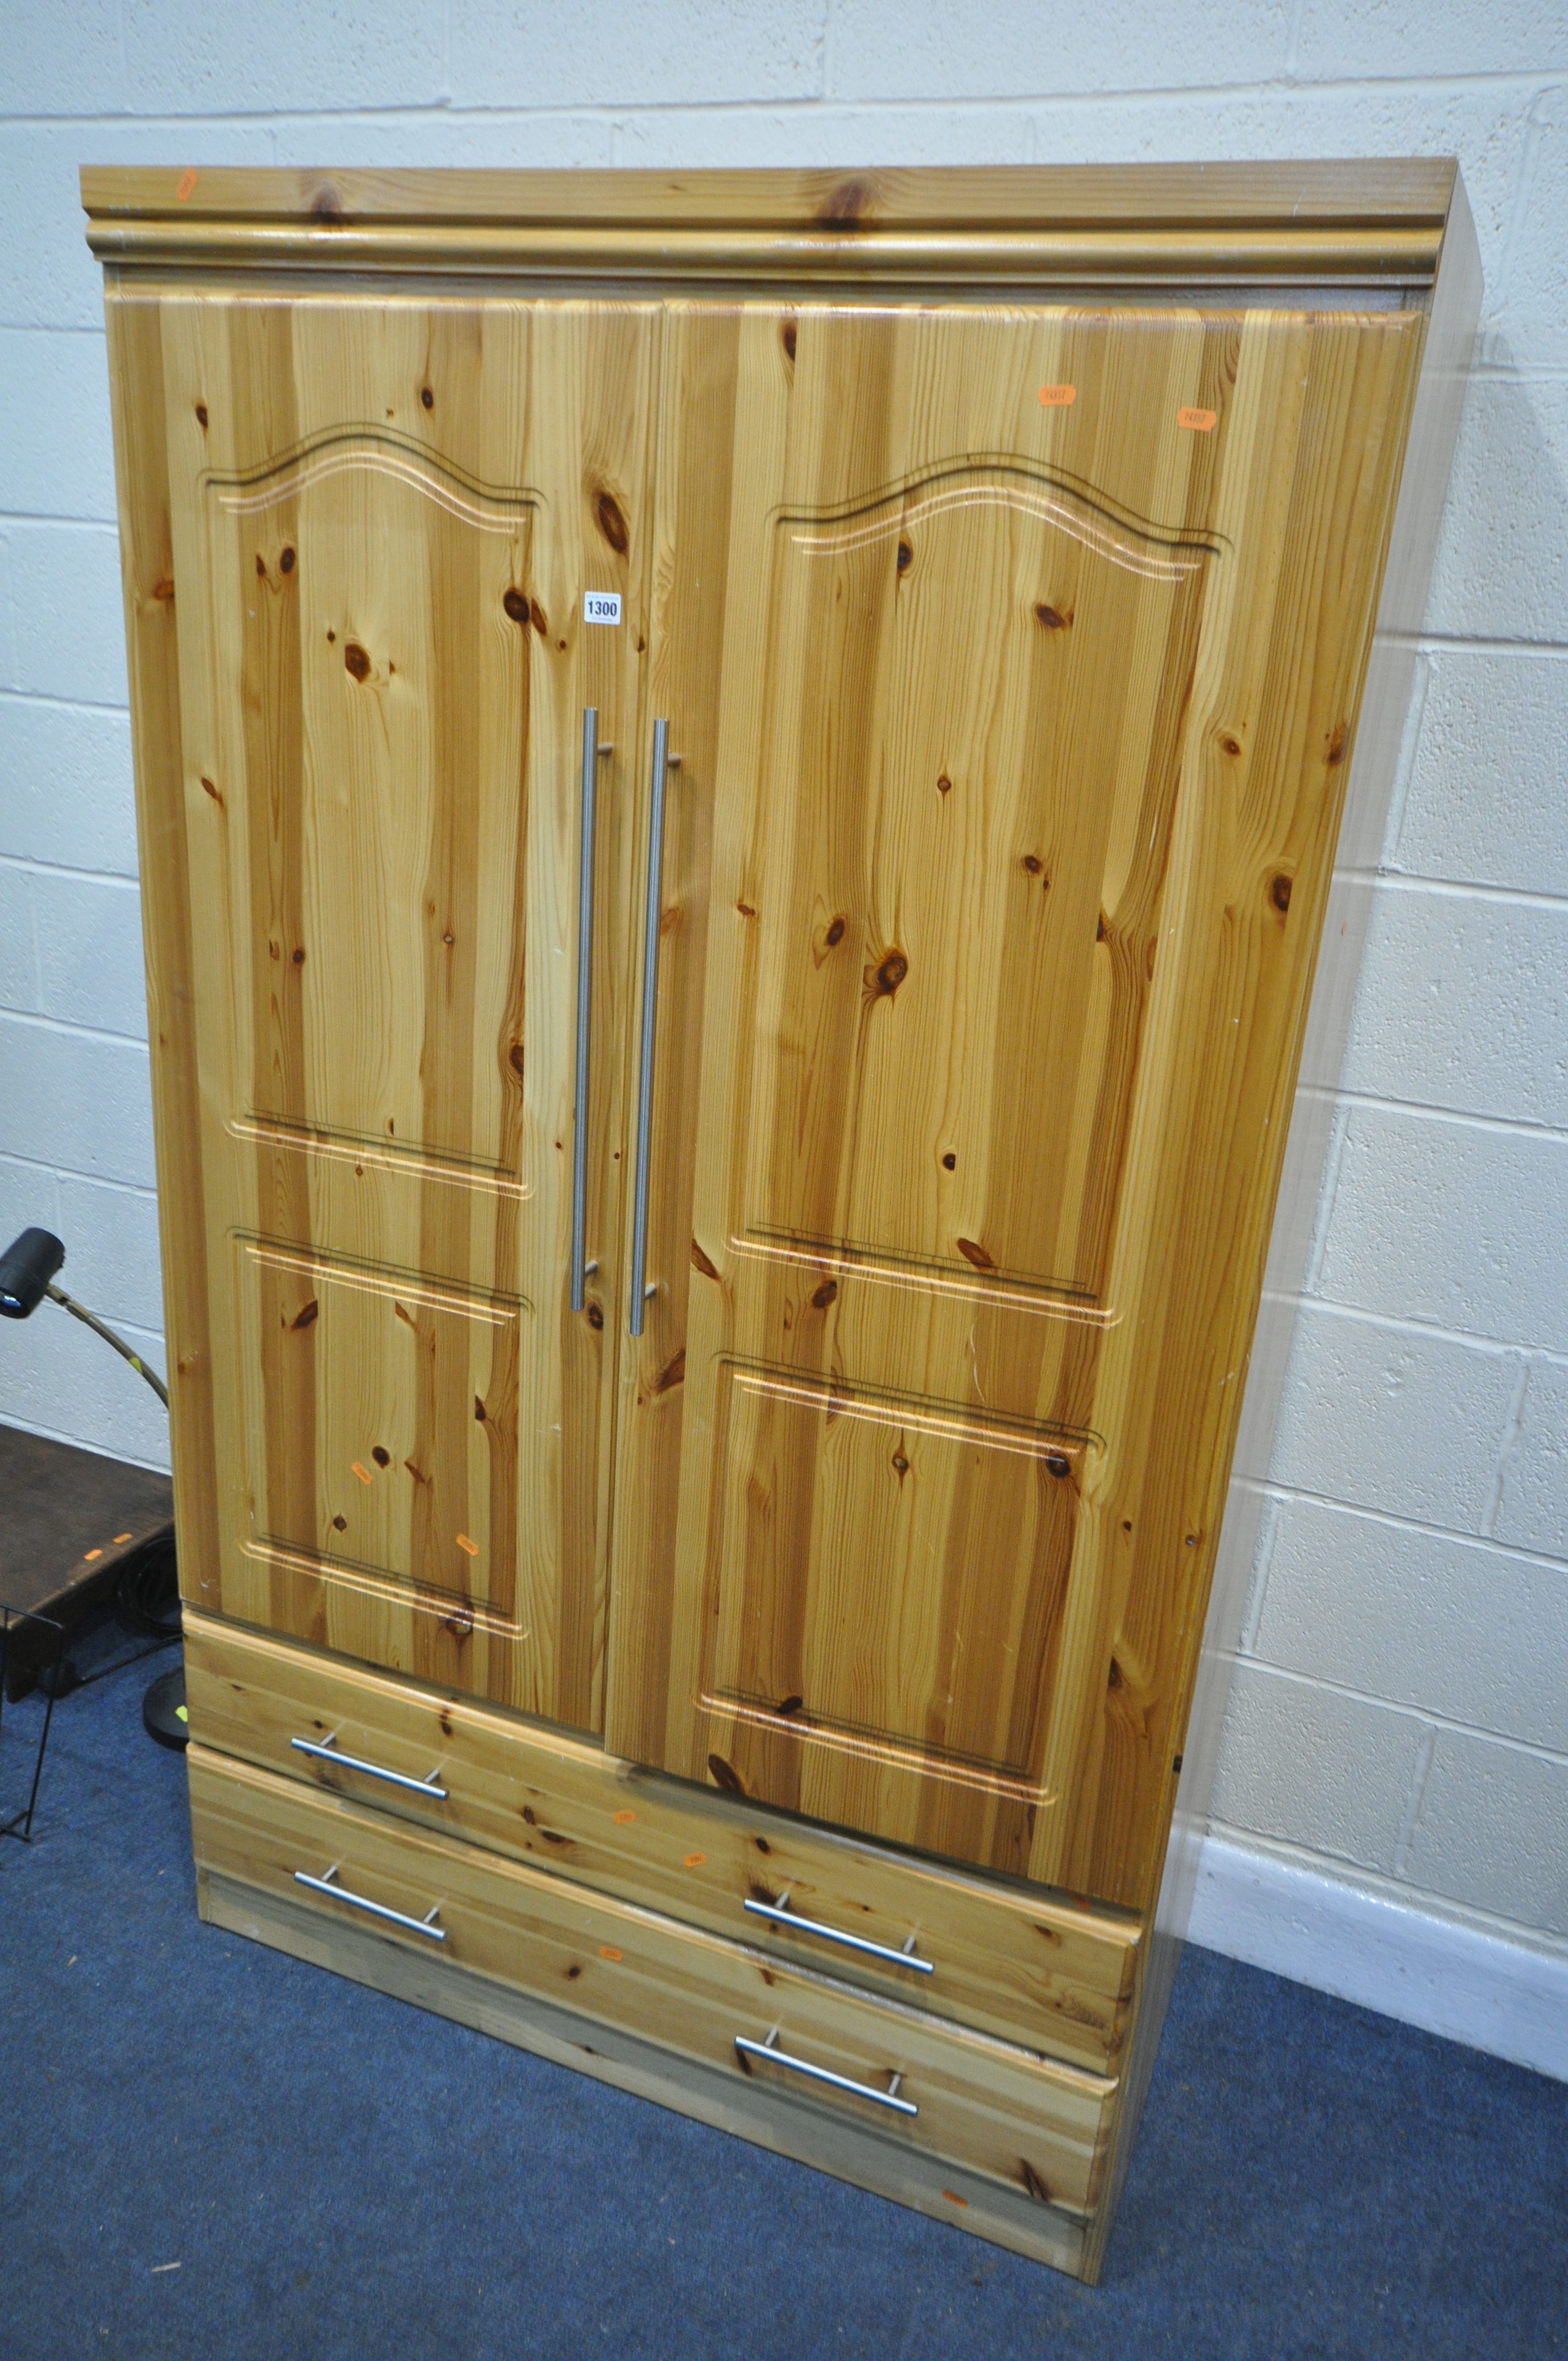 A MODERN PINE DOUBLE DOOR WARDROBE, with two drawers, width 107cm x depth 57cm x height 181cm (